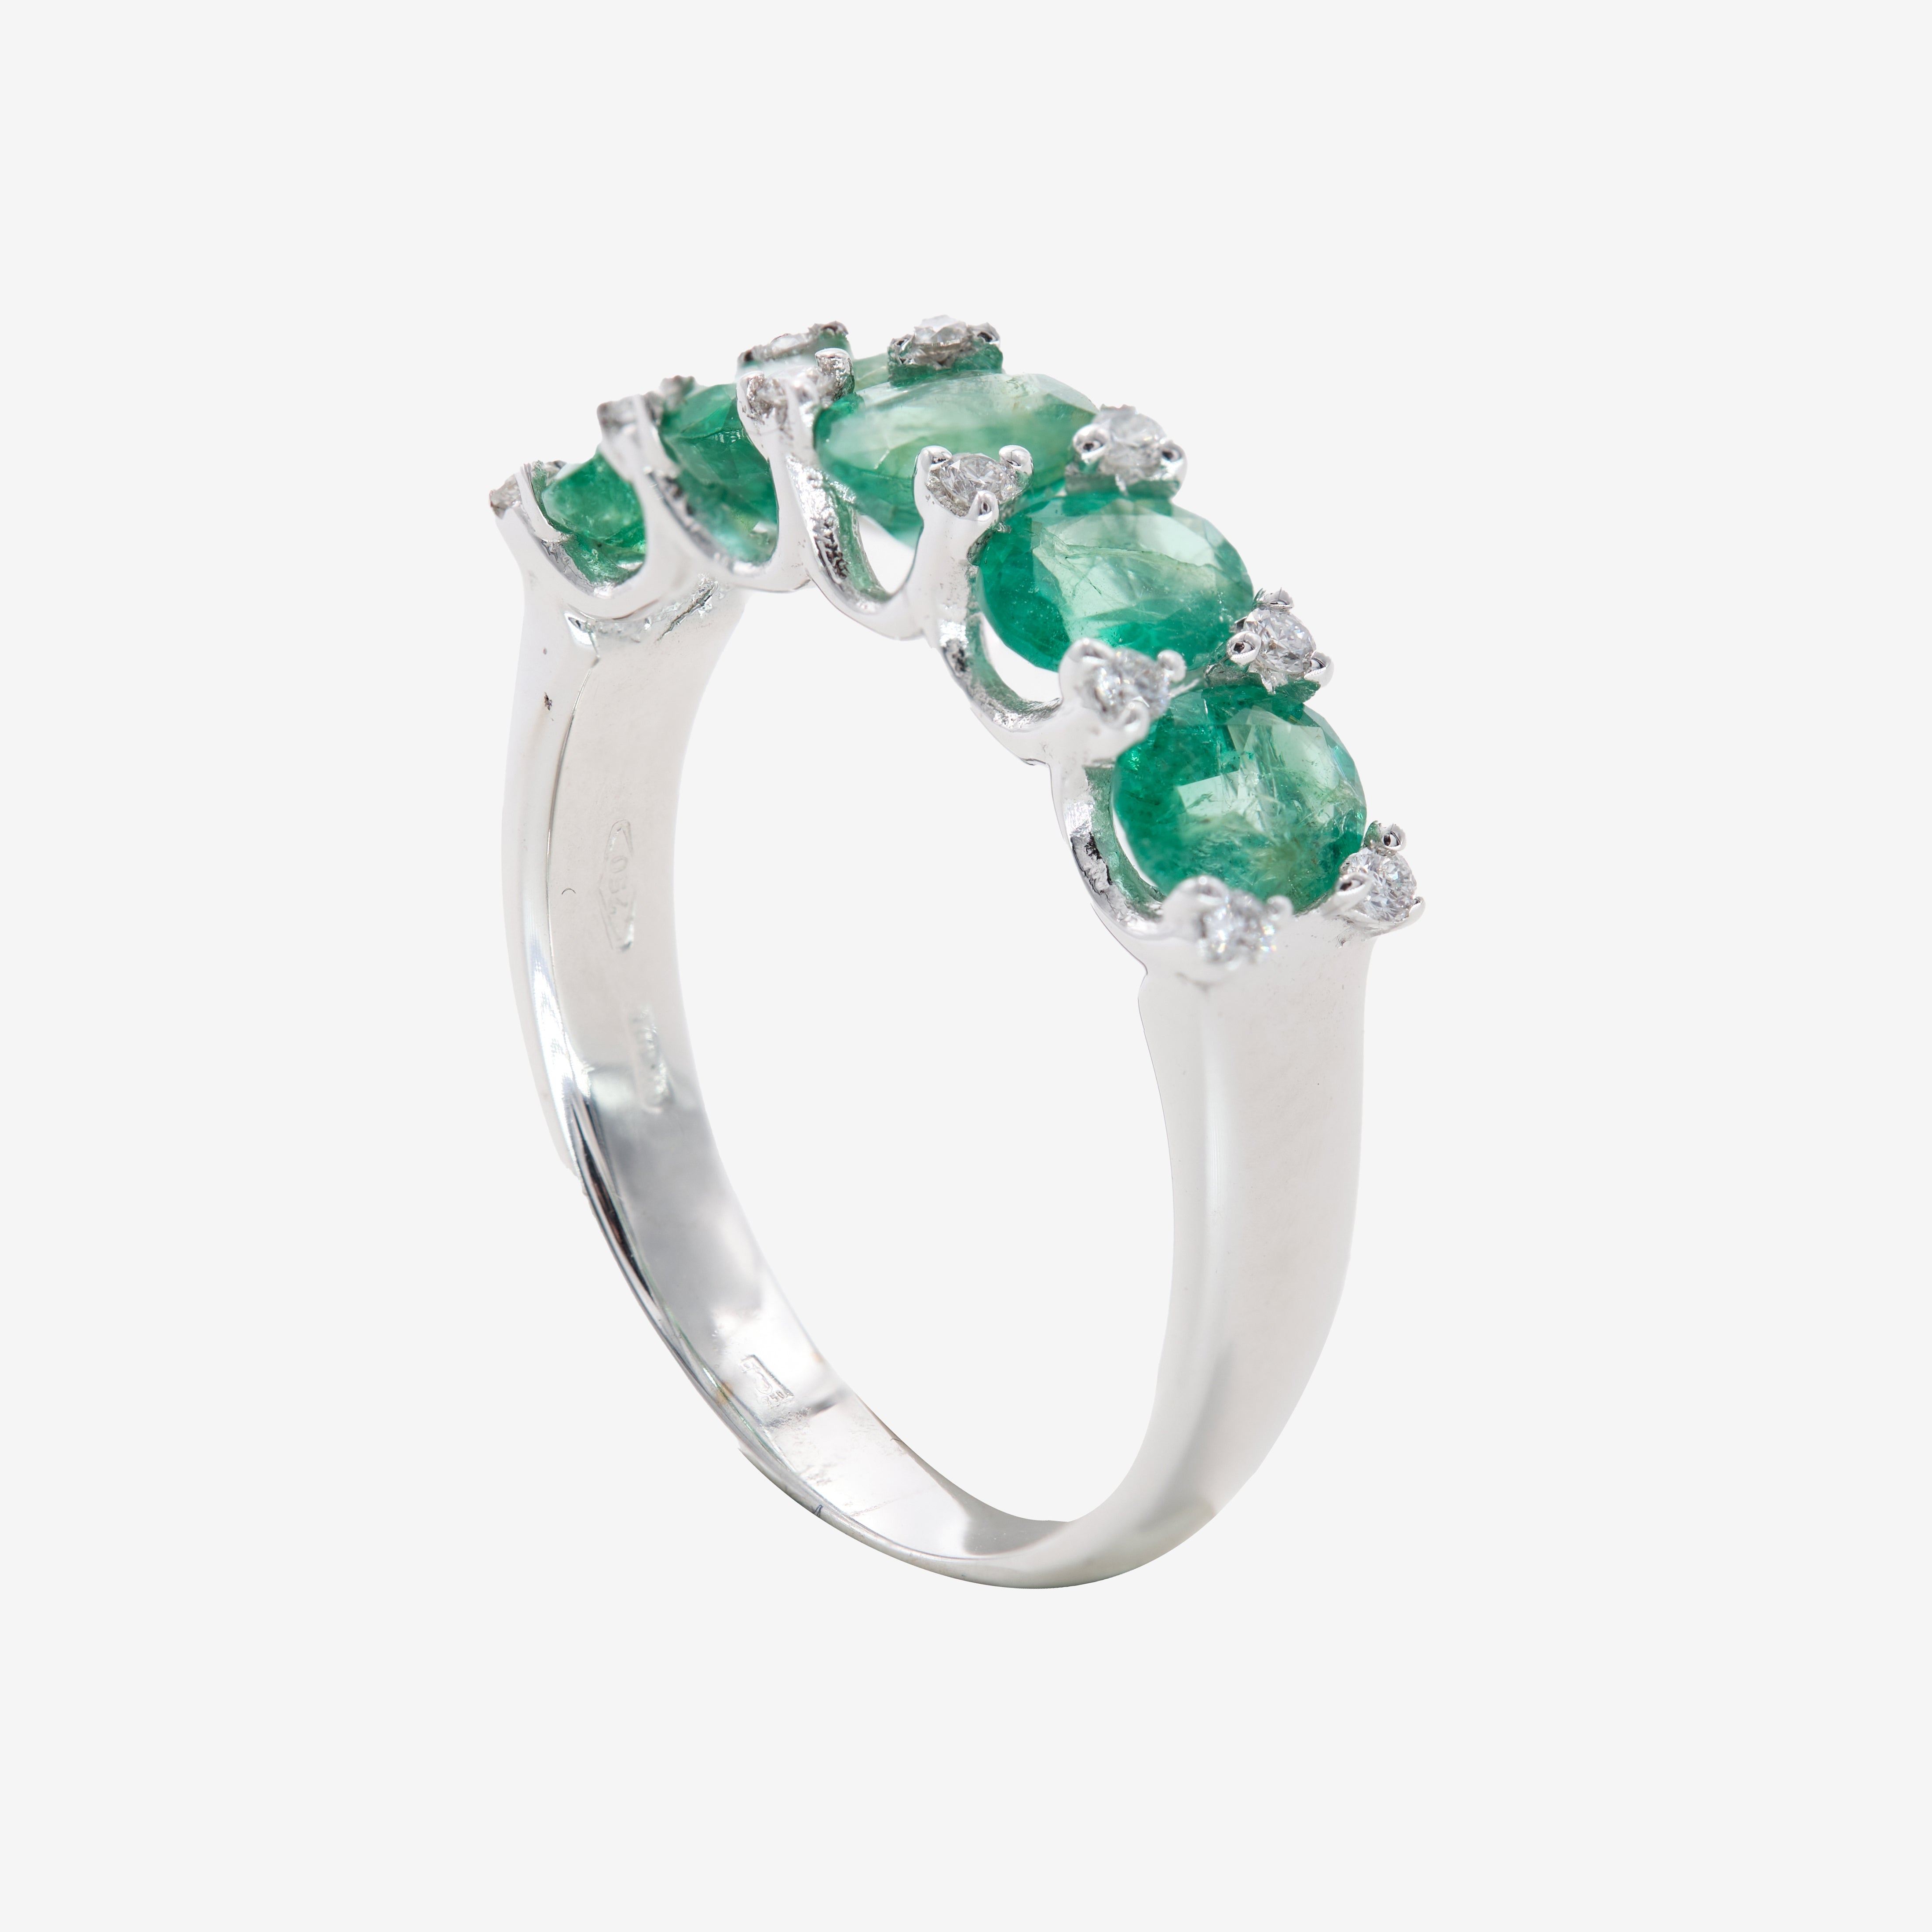 Lane ring with emeralds and diamonds